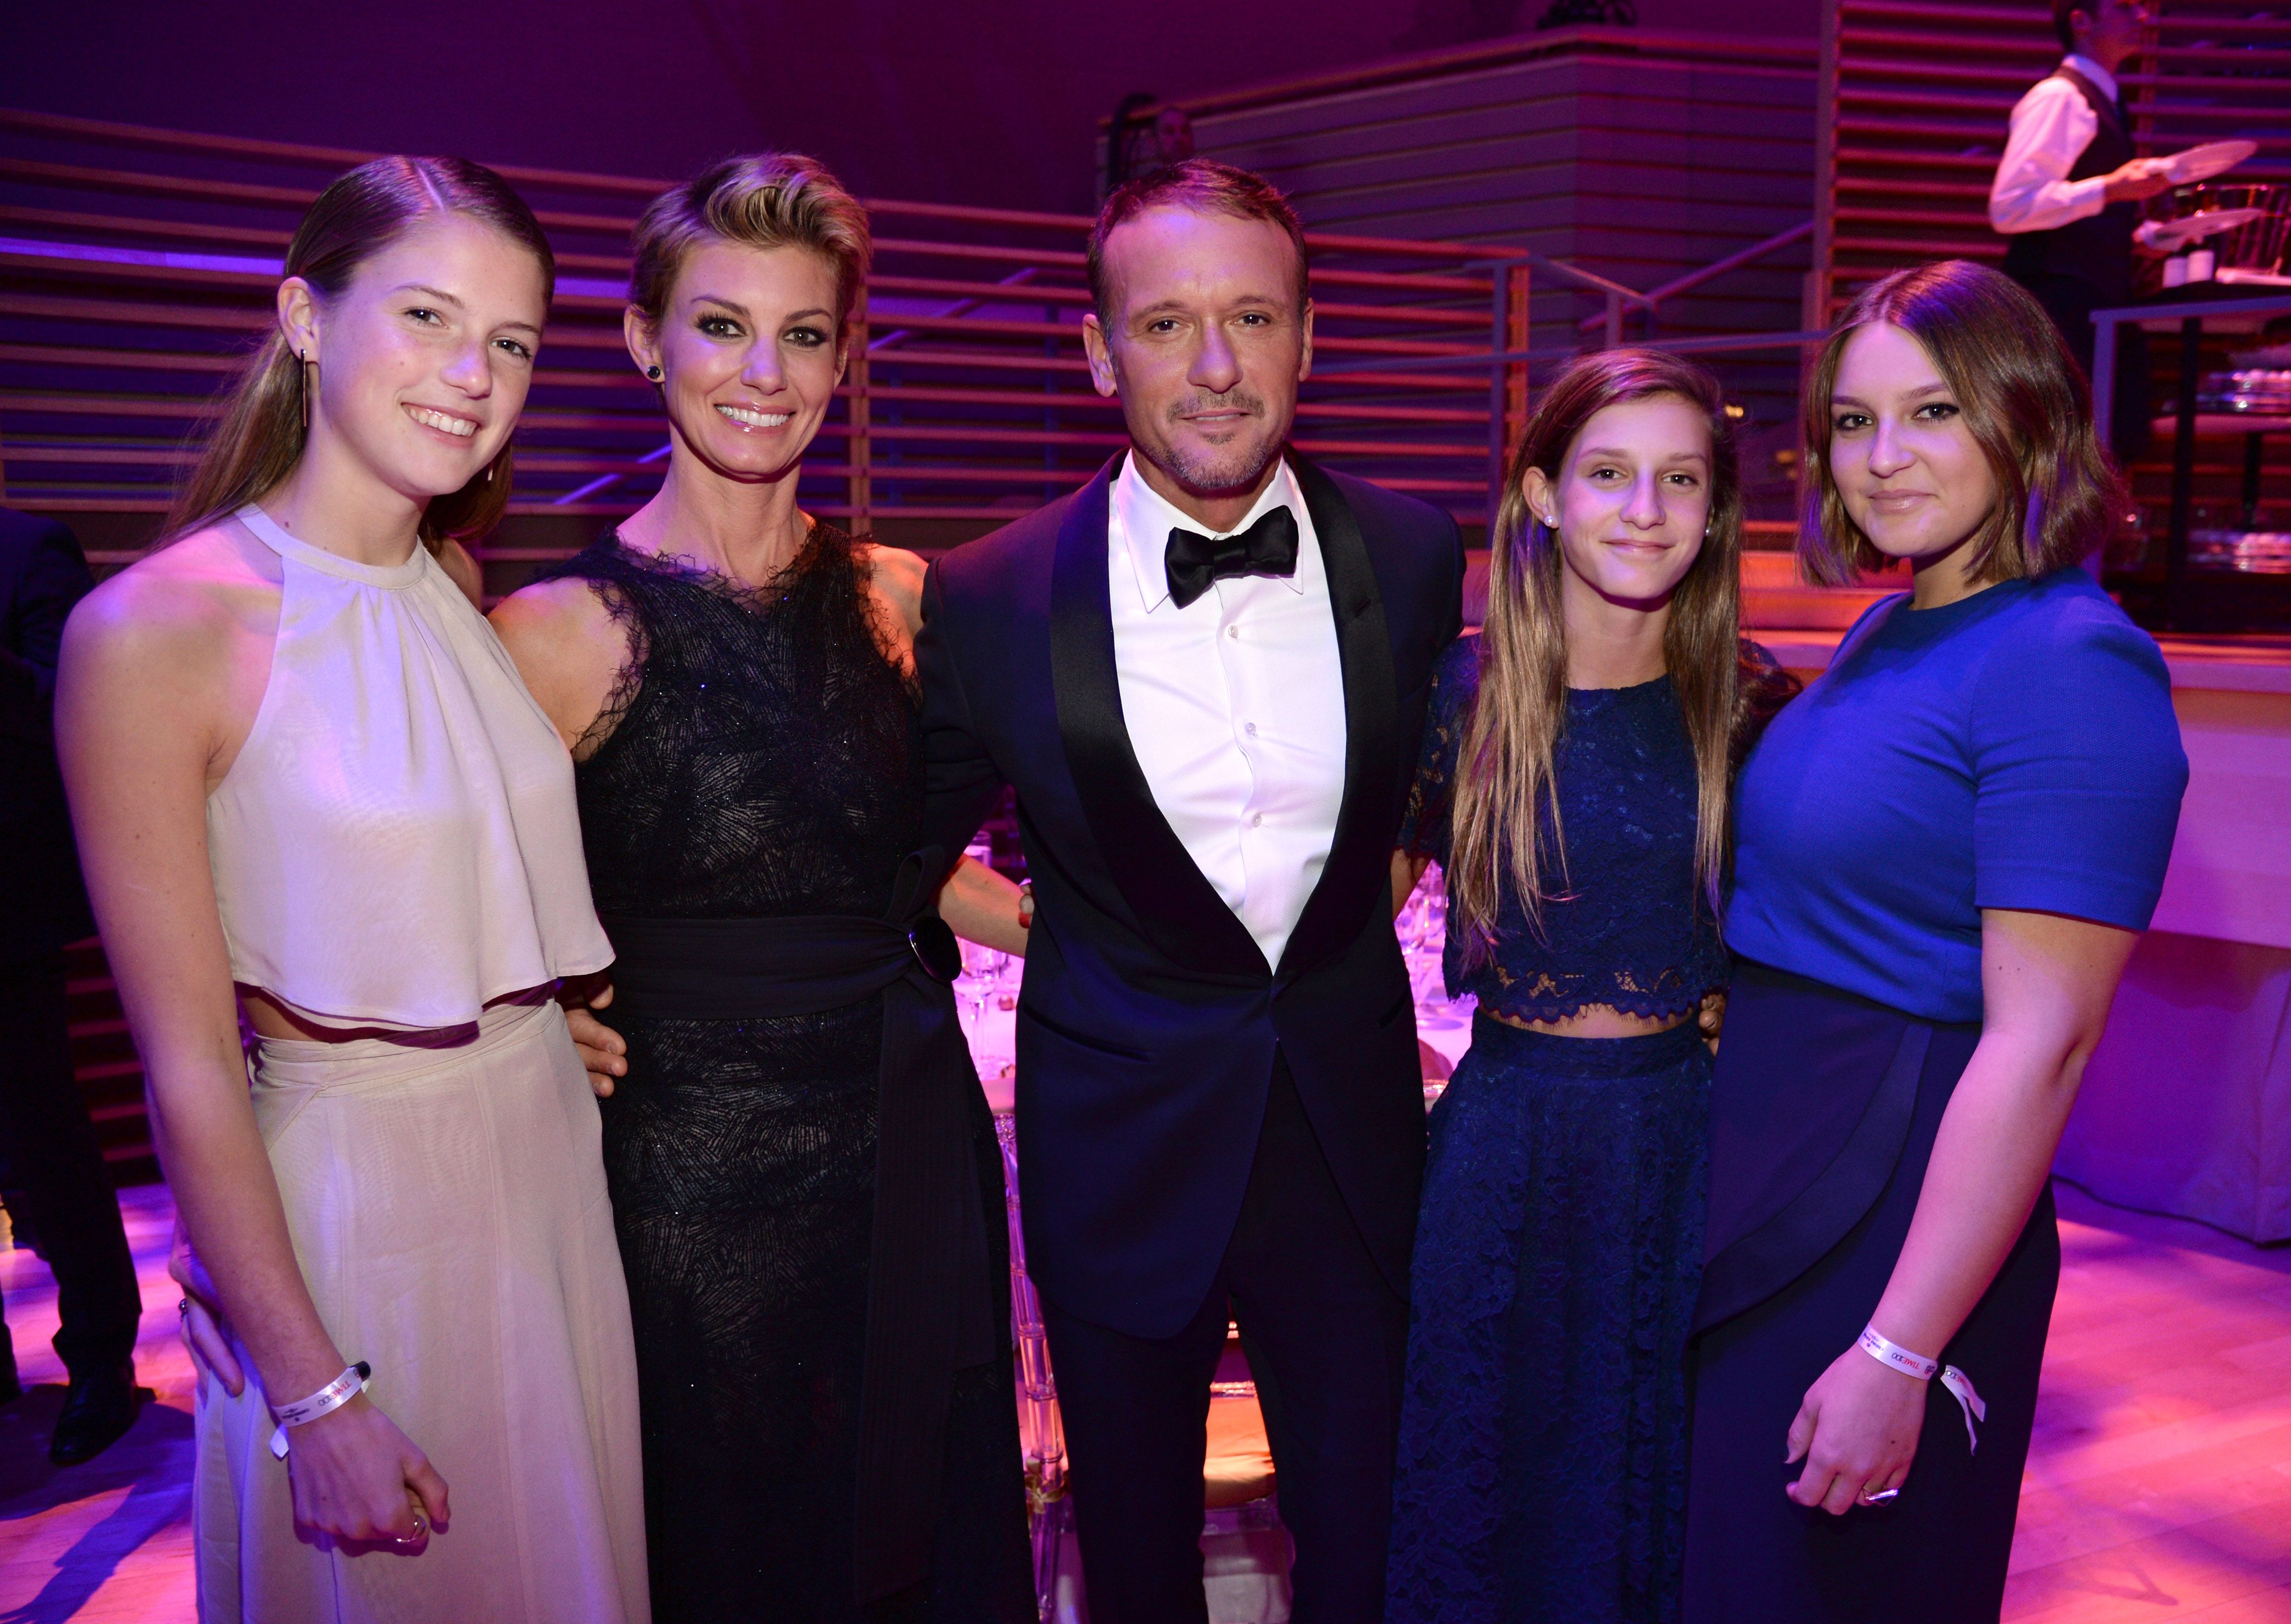 Gracie McGraw, Faith Hill, Tim McGraw, Audrey McGraw and Maggie McGraw at TIME 100 Gala, TIME's 100 Most Influential People In The World at Jazz at Lincoln Center on April 21, 2015 | Photo: Getty Images